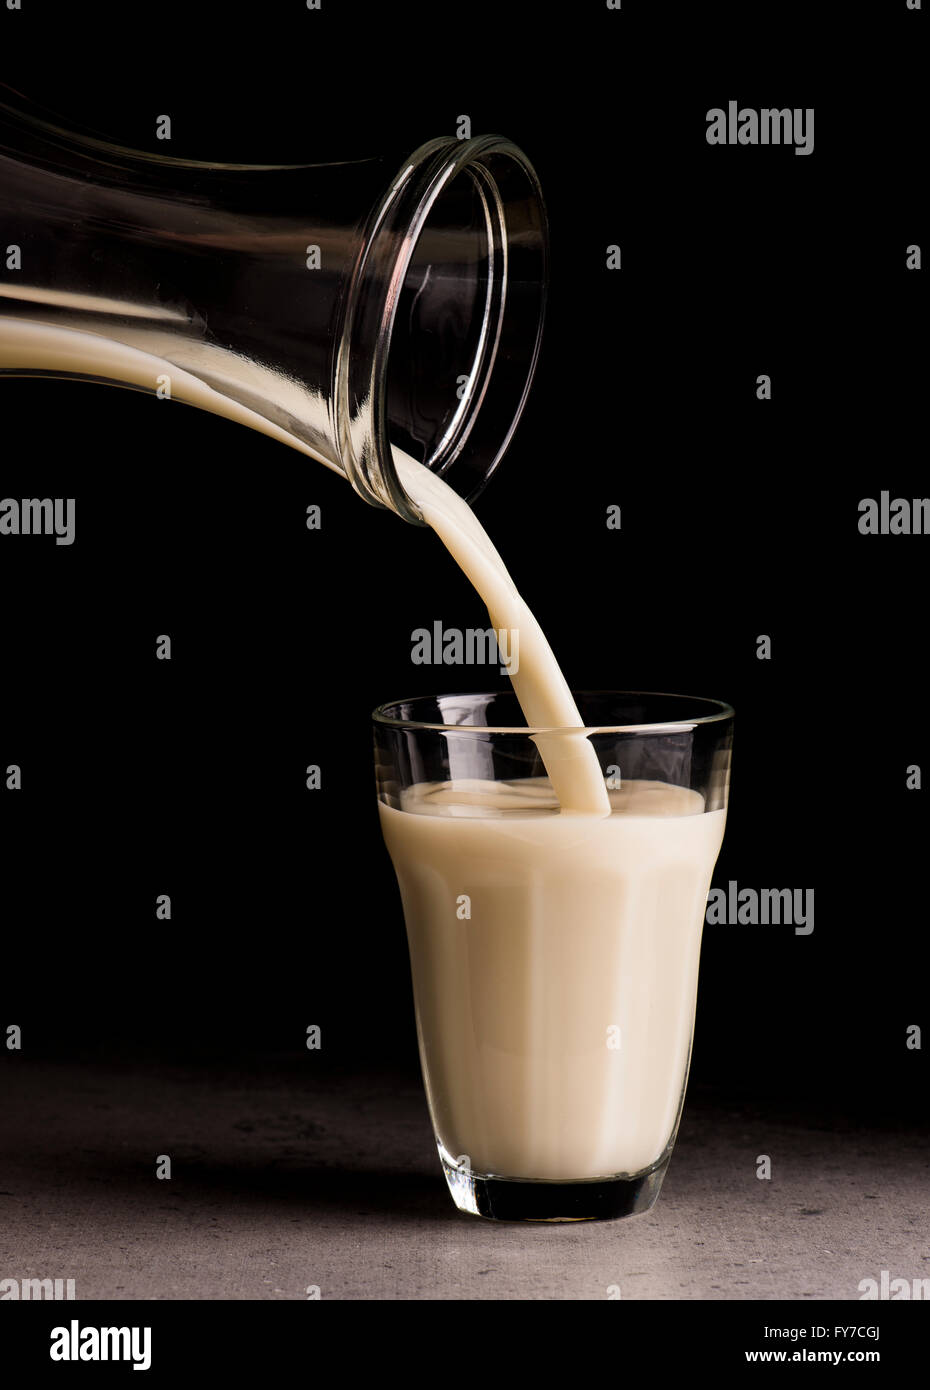 Oat milk being poured from bottle in a drinking glass. Black background. Stock Photo